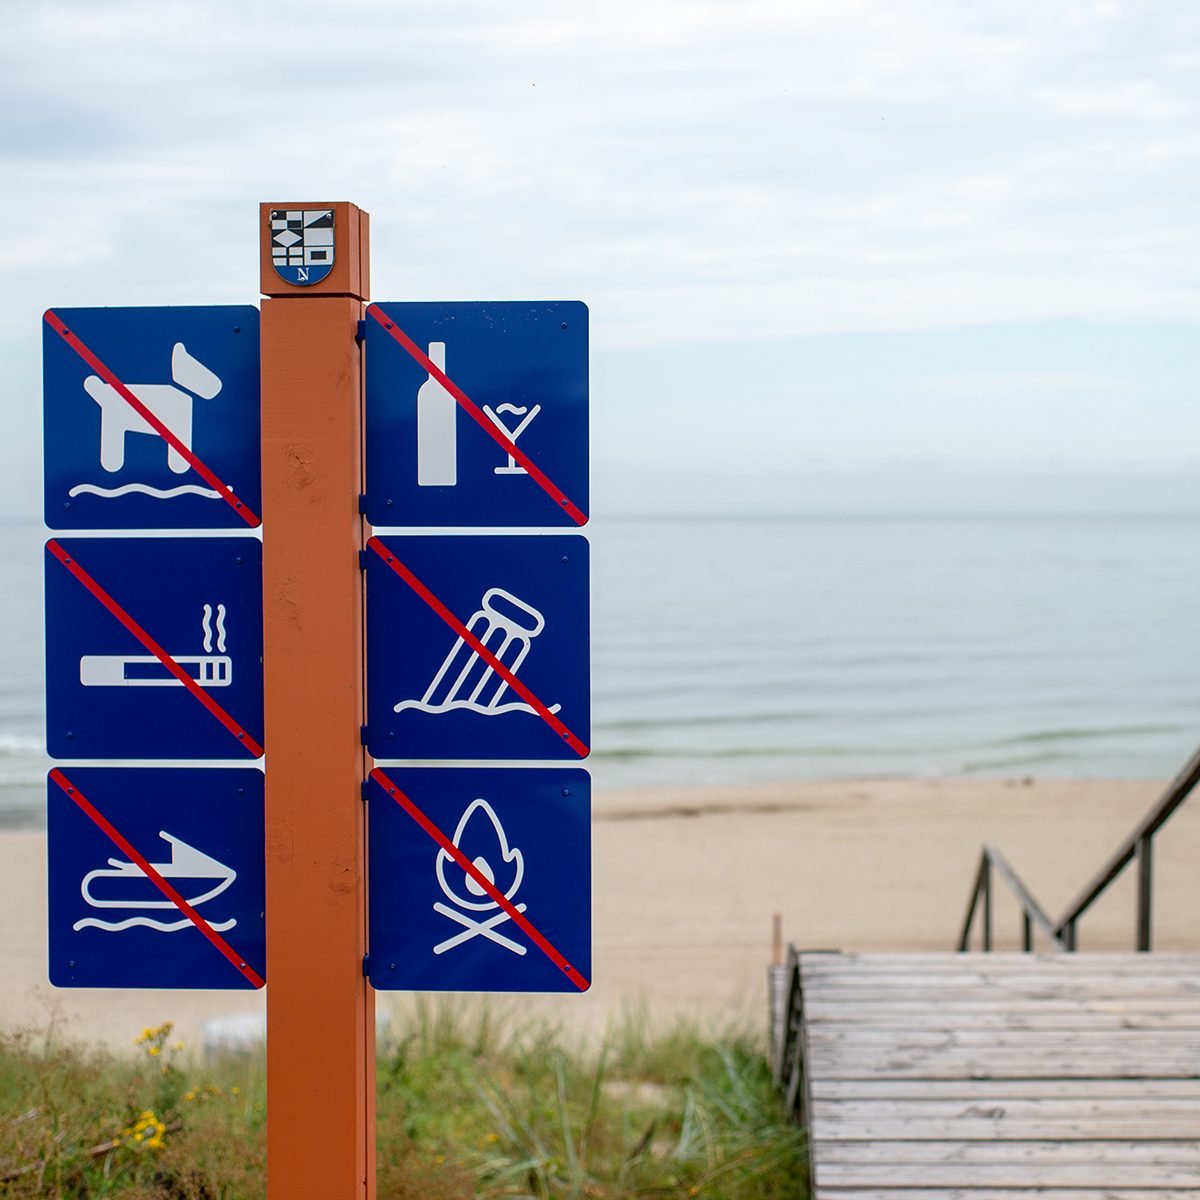 On the beach it is forbidden: walking Pets, drinking alcohol, Smoking, garbage, boating,bonfires. No dog. Please don't litter beach.